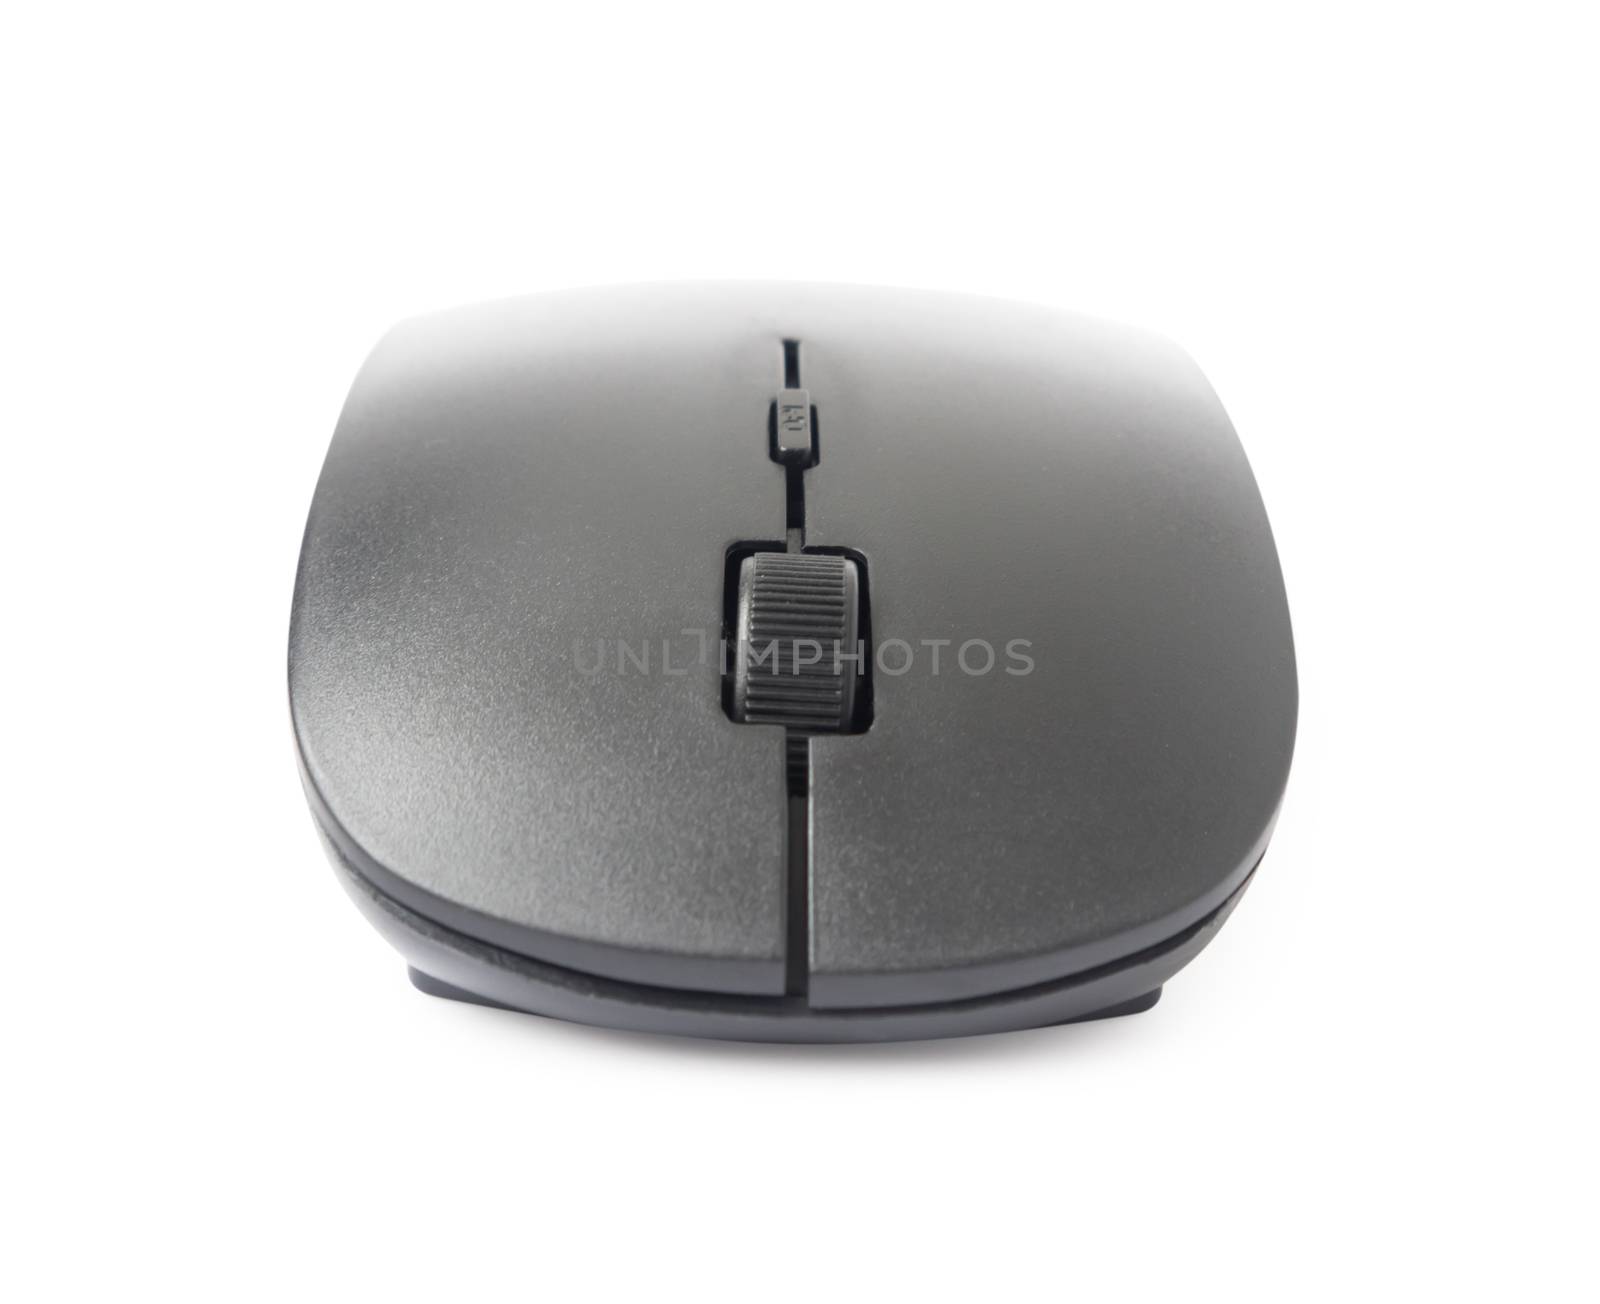 Black wireless computer mouse isolated on white background with clipping path